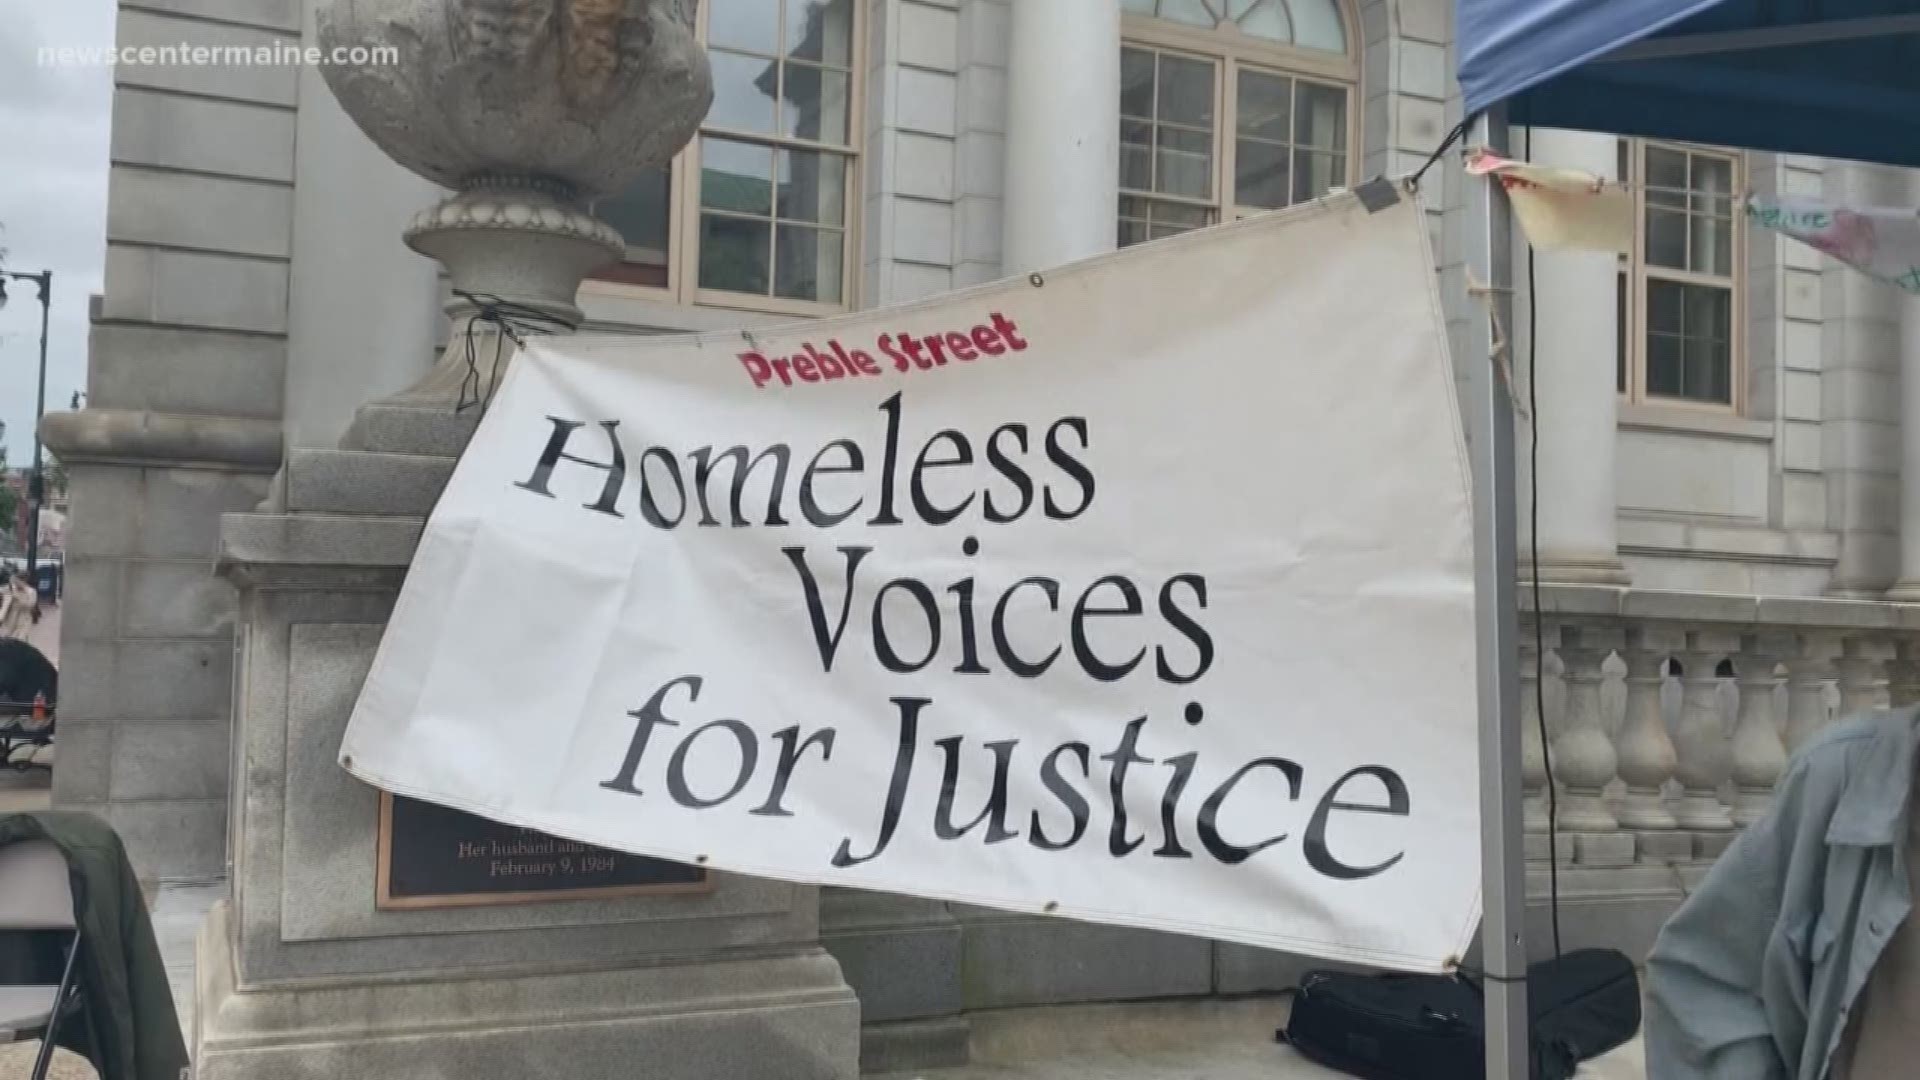 Members of Portland's Homeless Voices for Justice rallied against the chosen Riverton homeless shelter site on Friday.